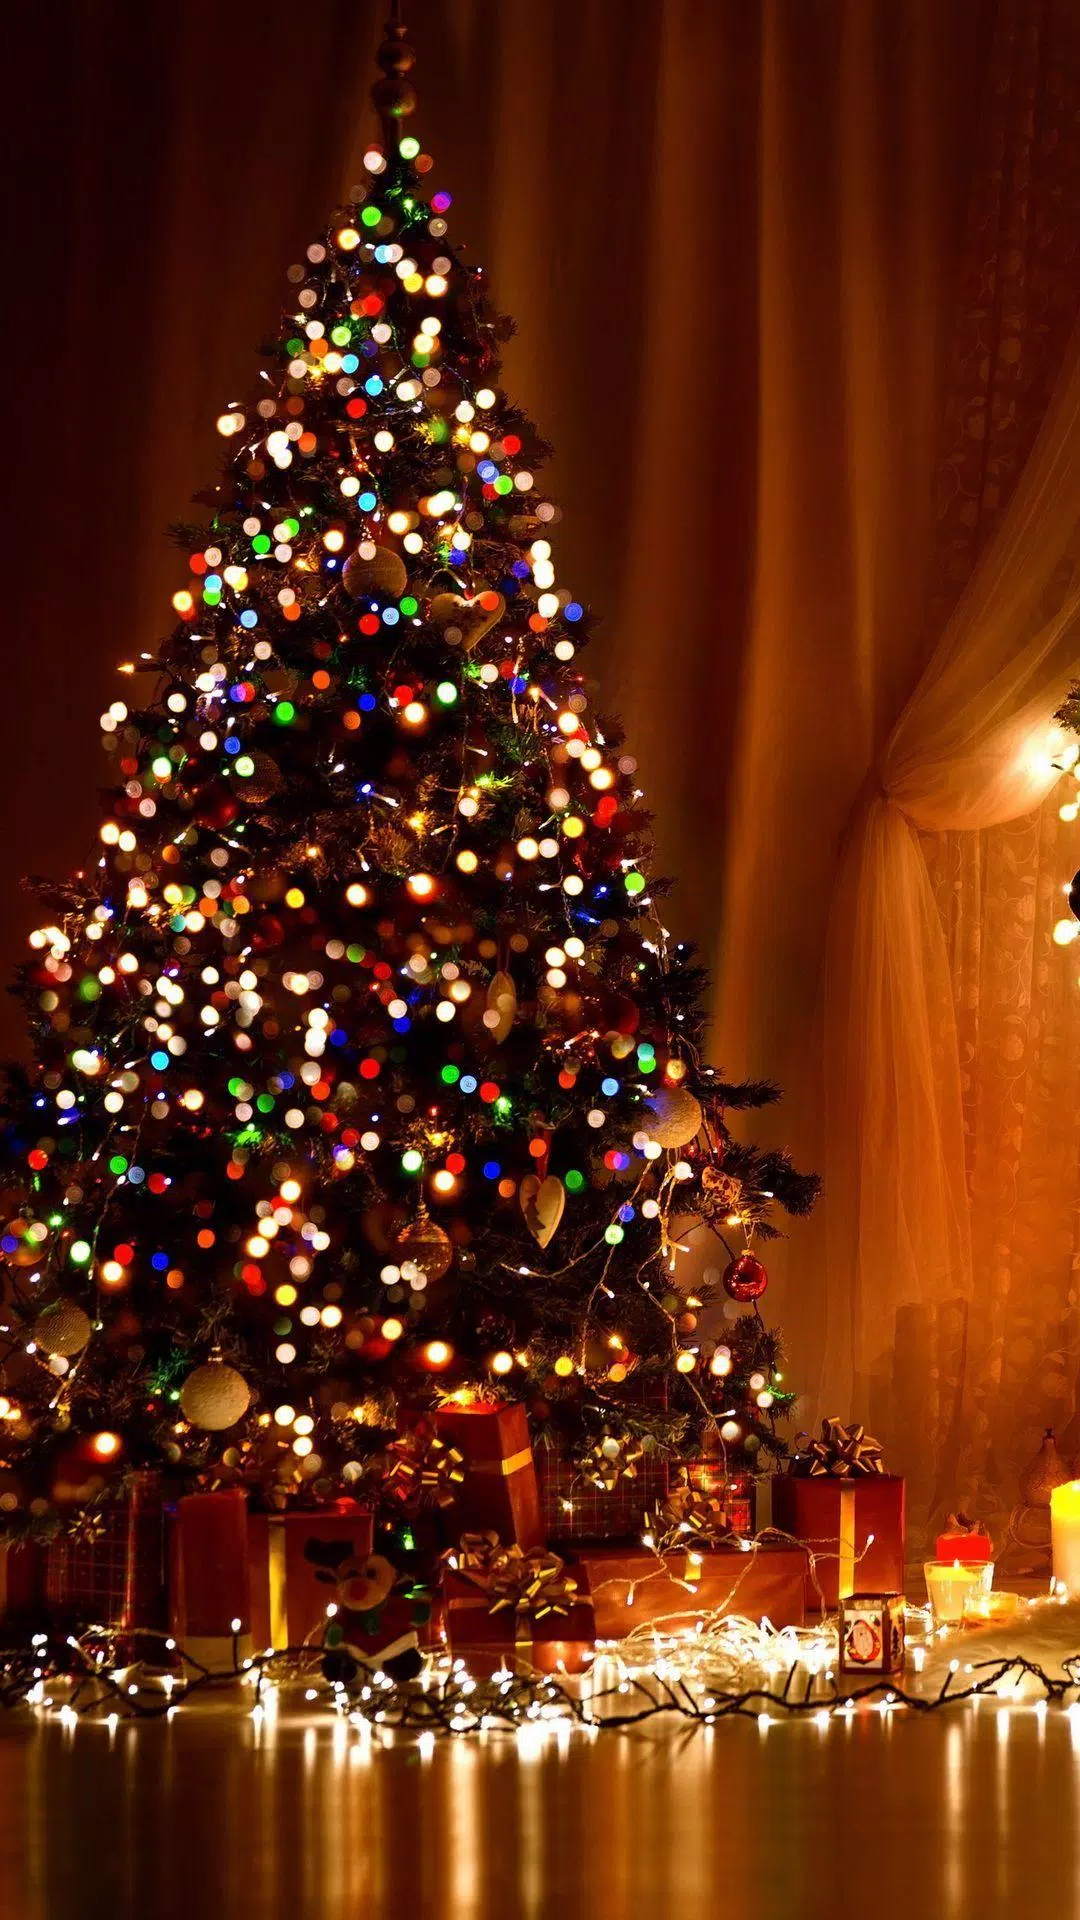 A Christmas tree with lights and presents underneath. - Christmas lights